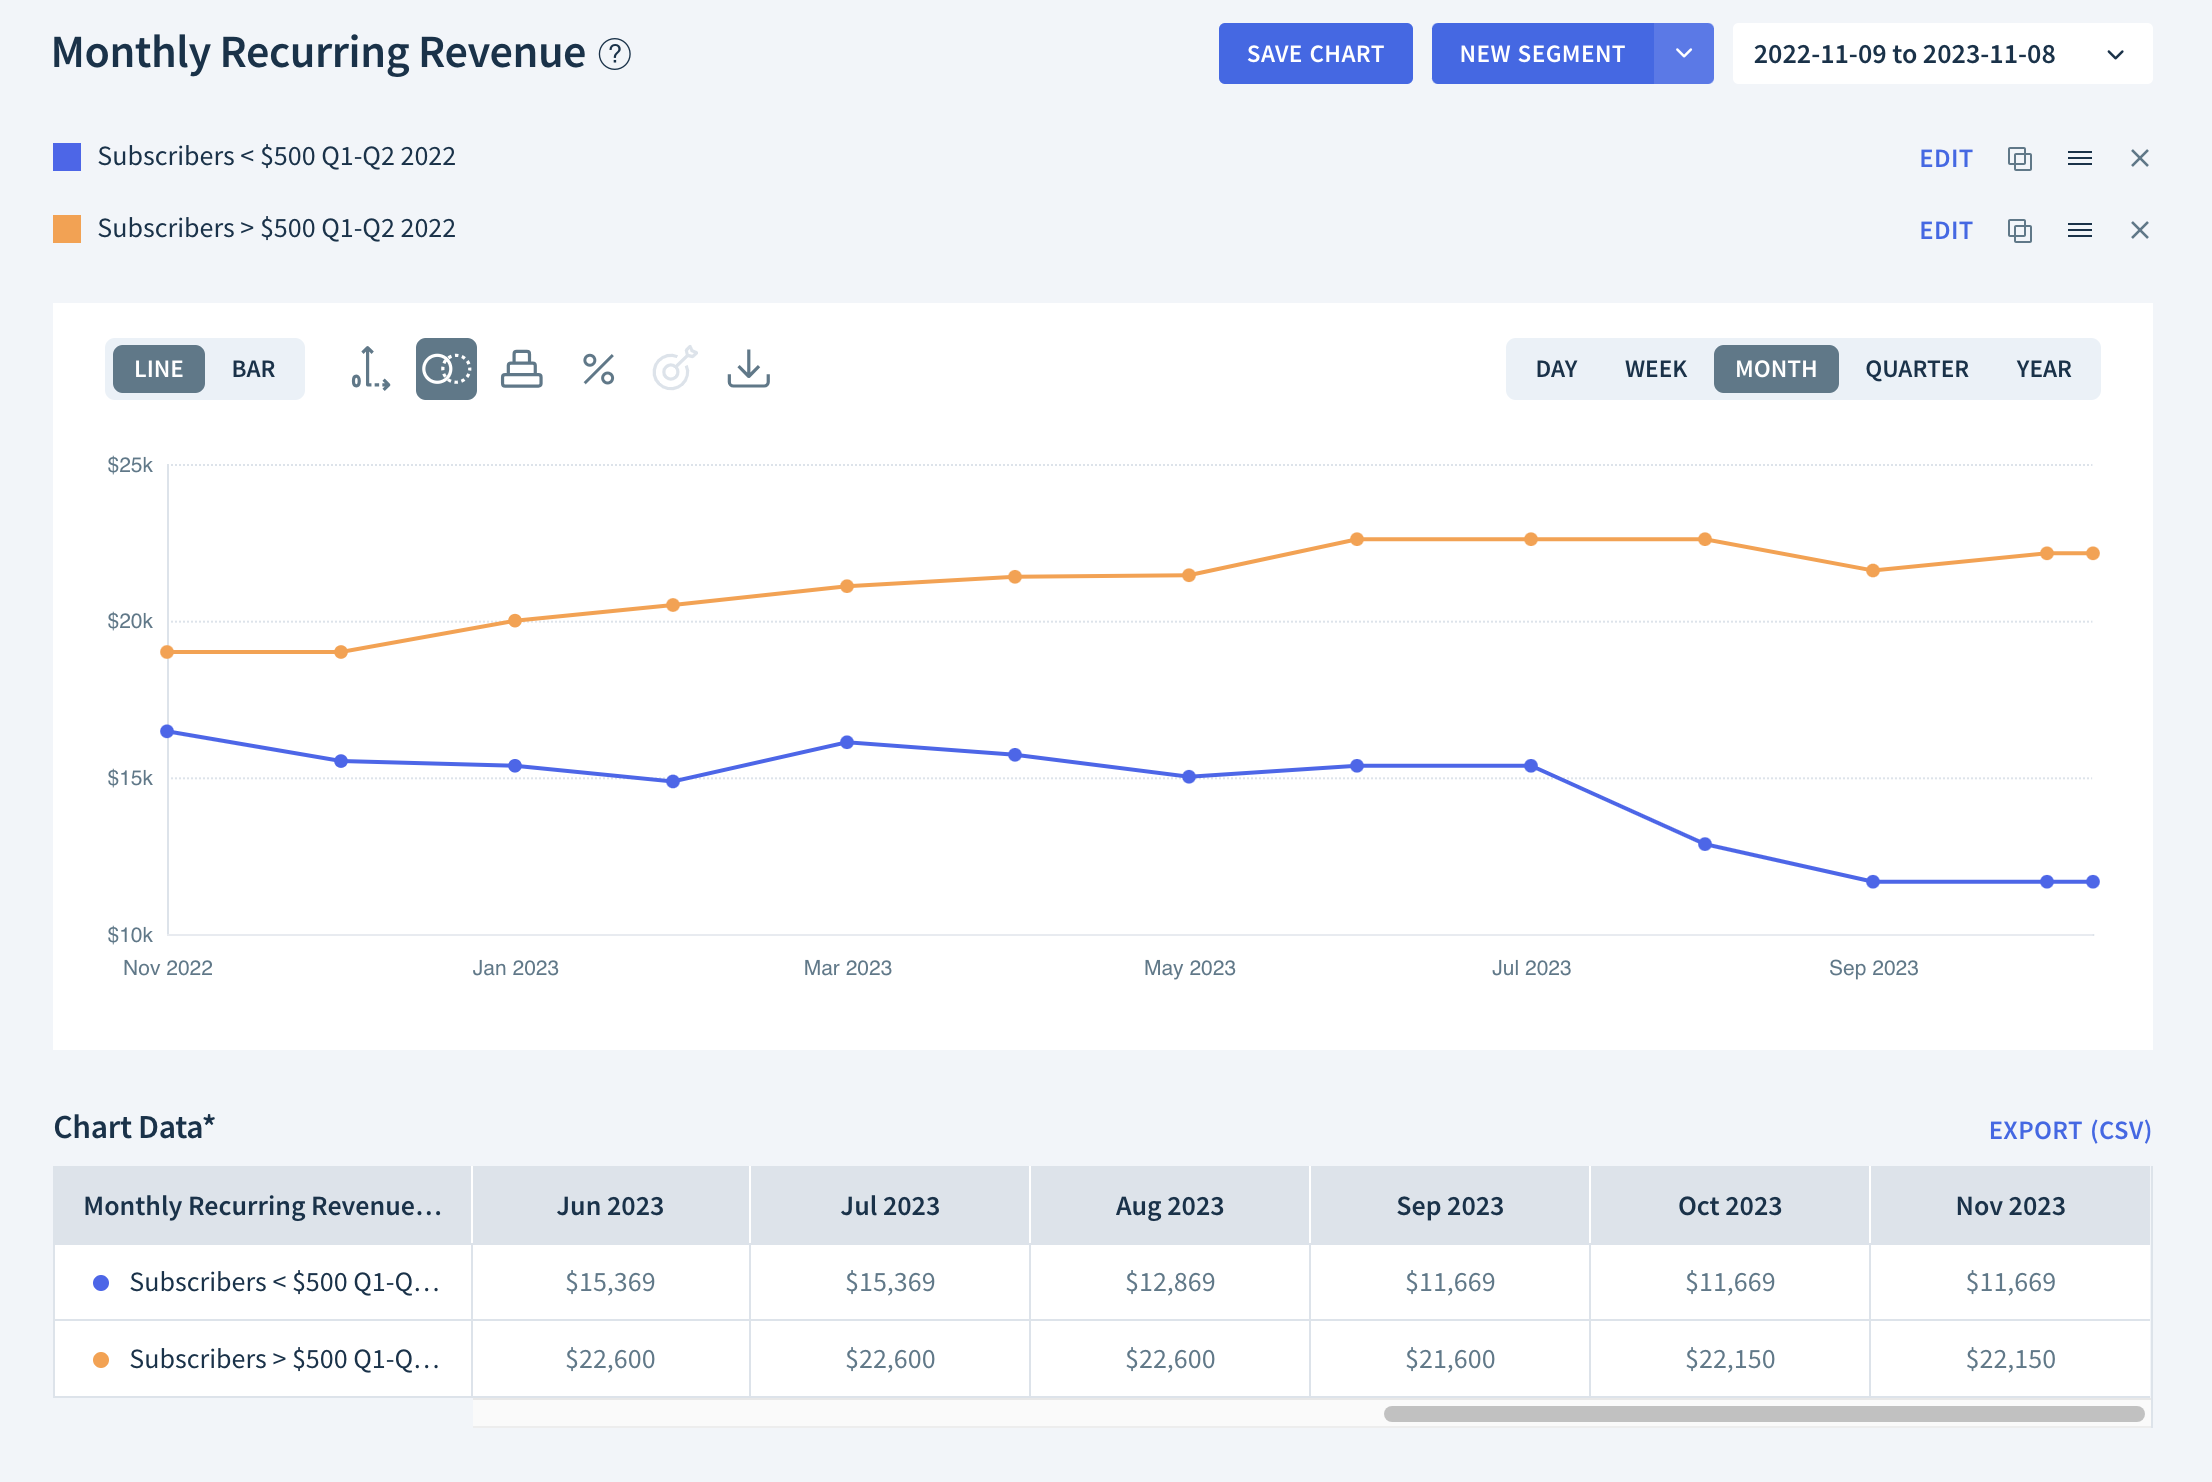 Screenshot of the Monthly Recurring Revenue chart displaying the two segments we describe here